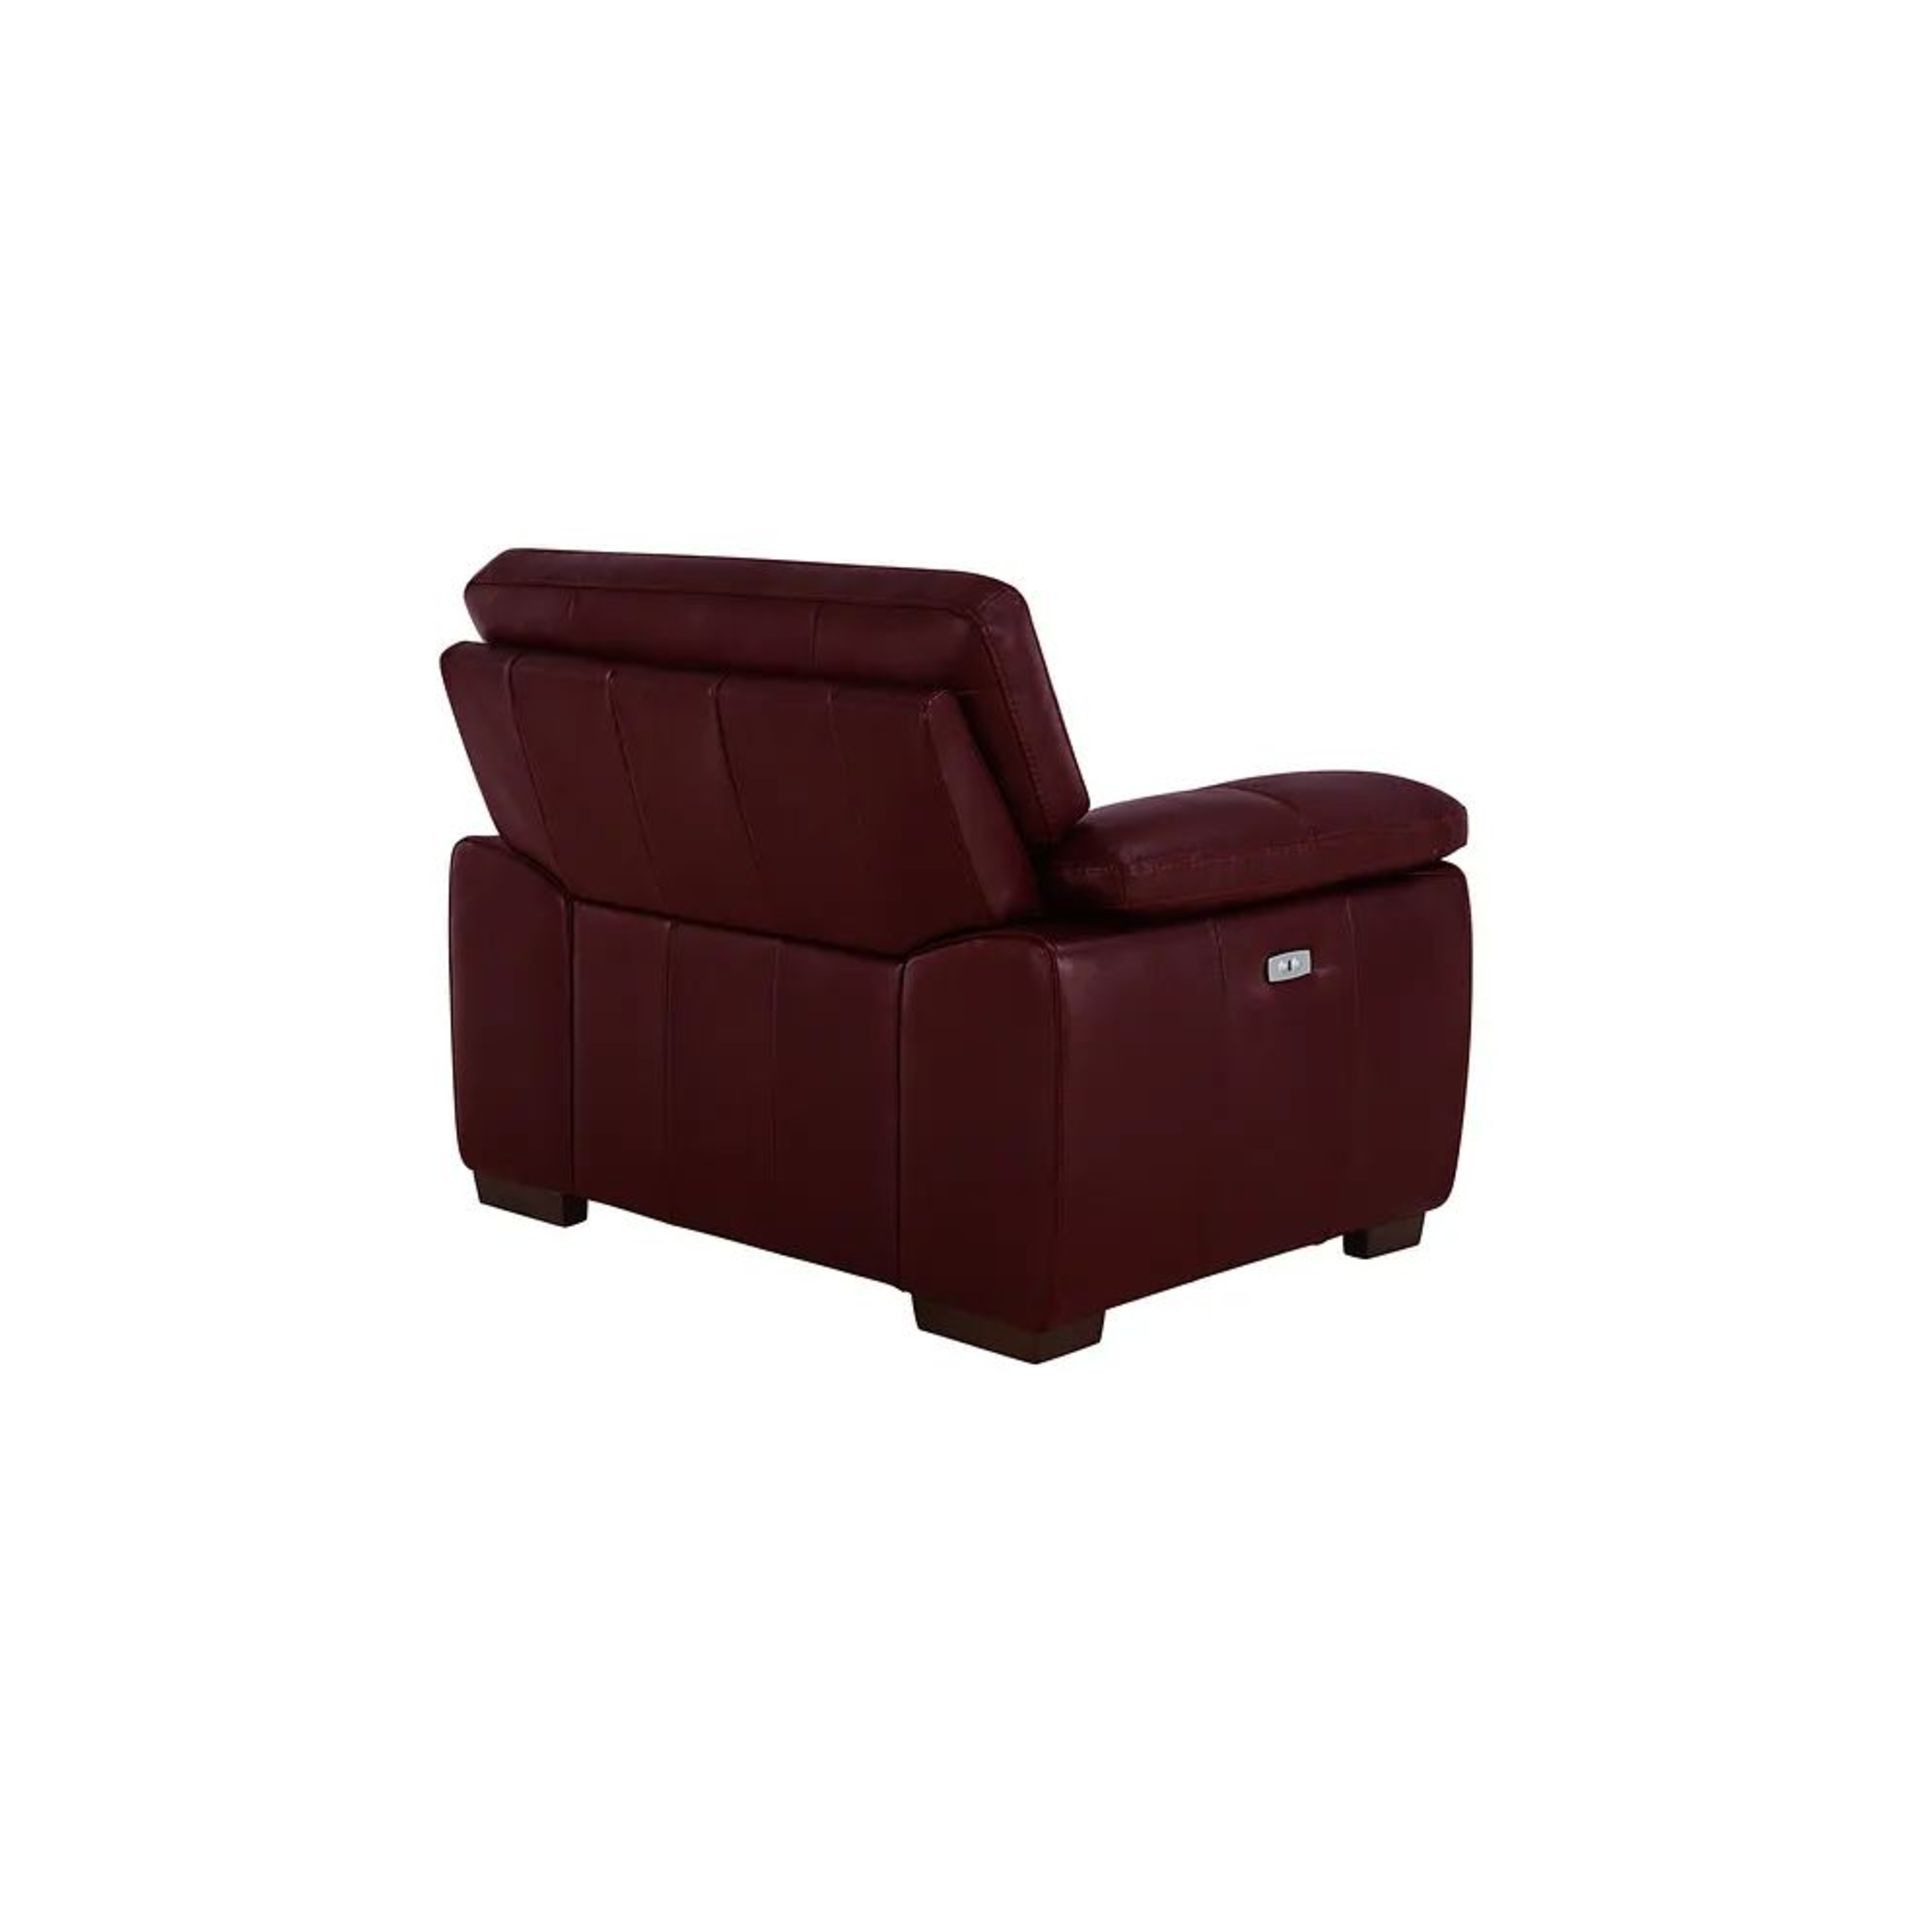 BRAND NEW ARLINGTON Electric Recliner Armchair - BURGANDY LEATHER. RRP £1199. Create a traditional - Image 5 of 12